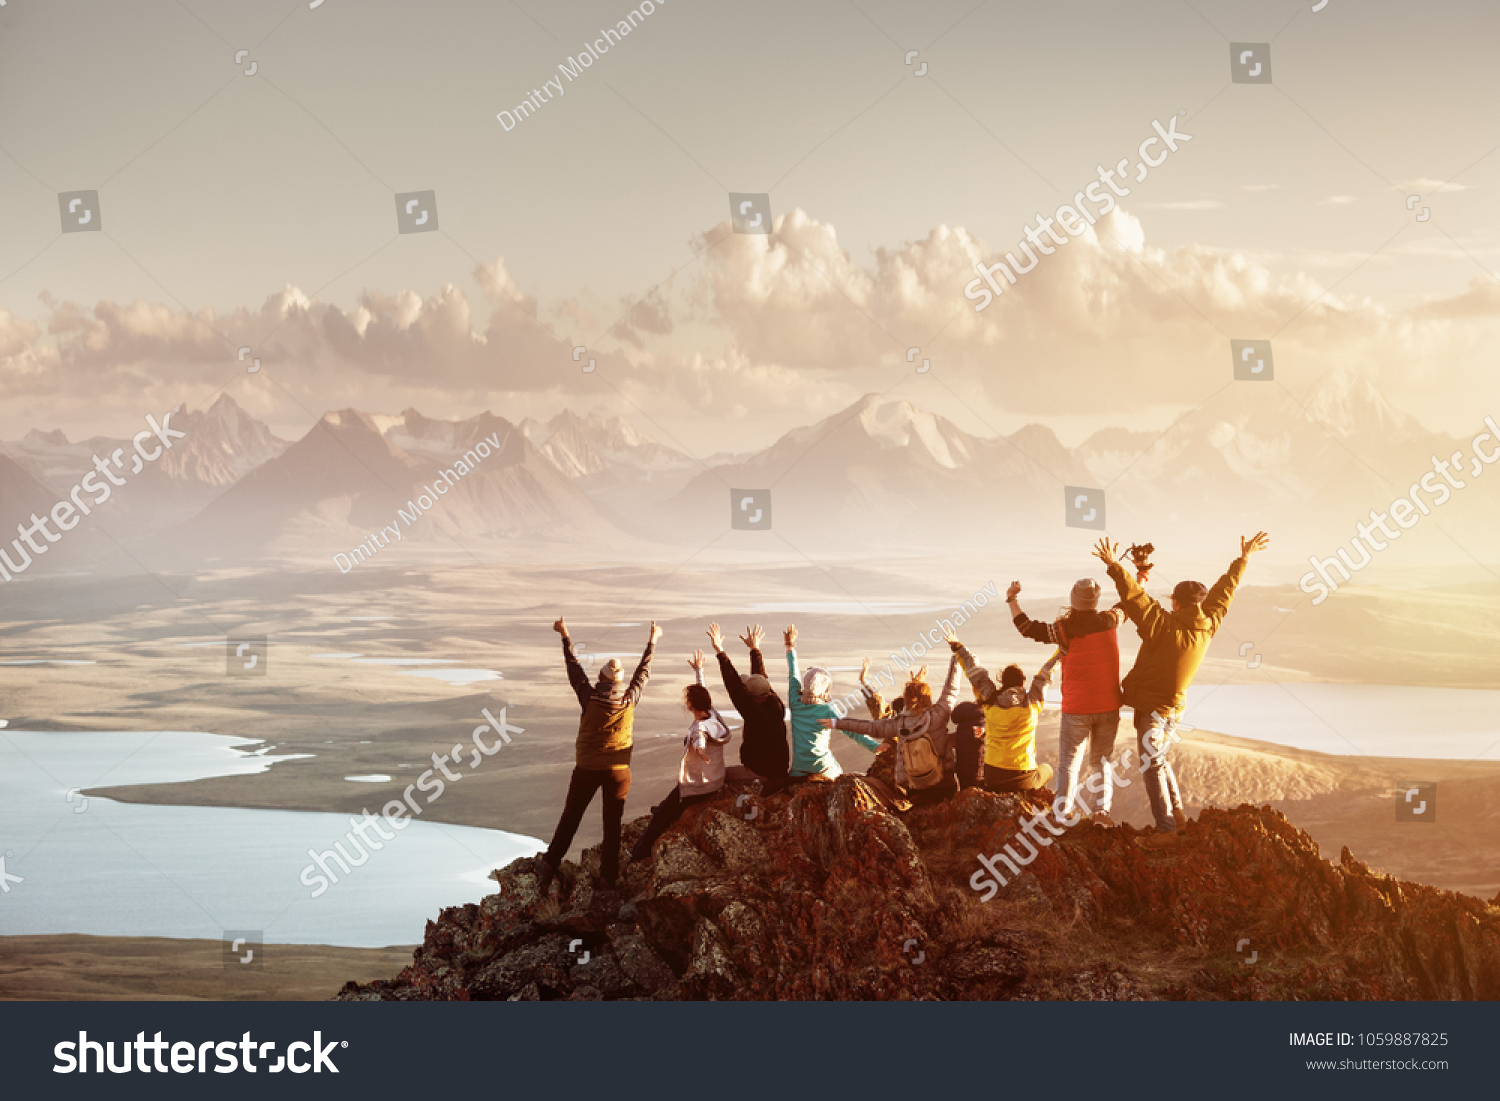 Big group of people having fun in success pose with raised arms on mountain top against sunset lakes and mountains. Travel, adventure or expedition concept #1059887825